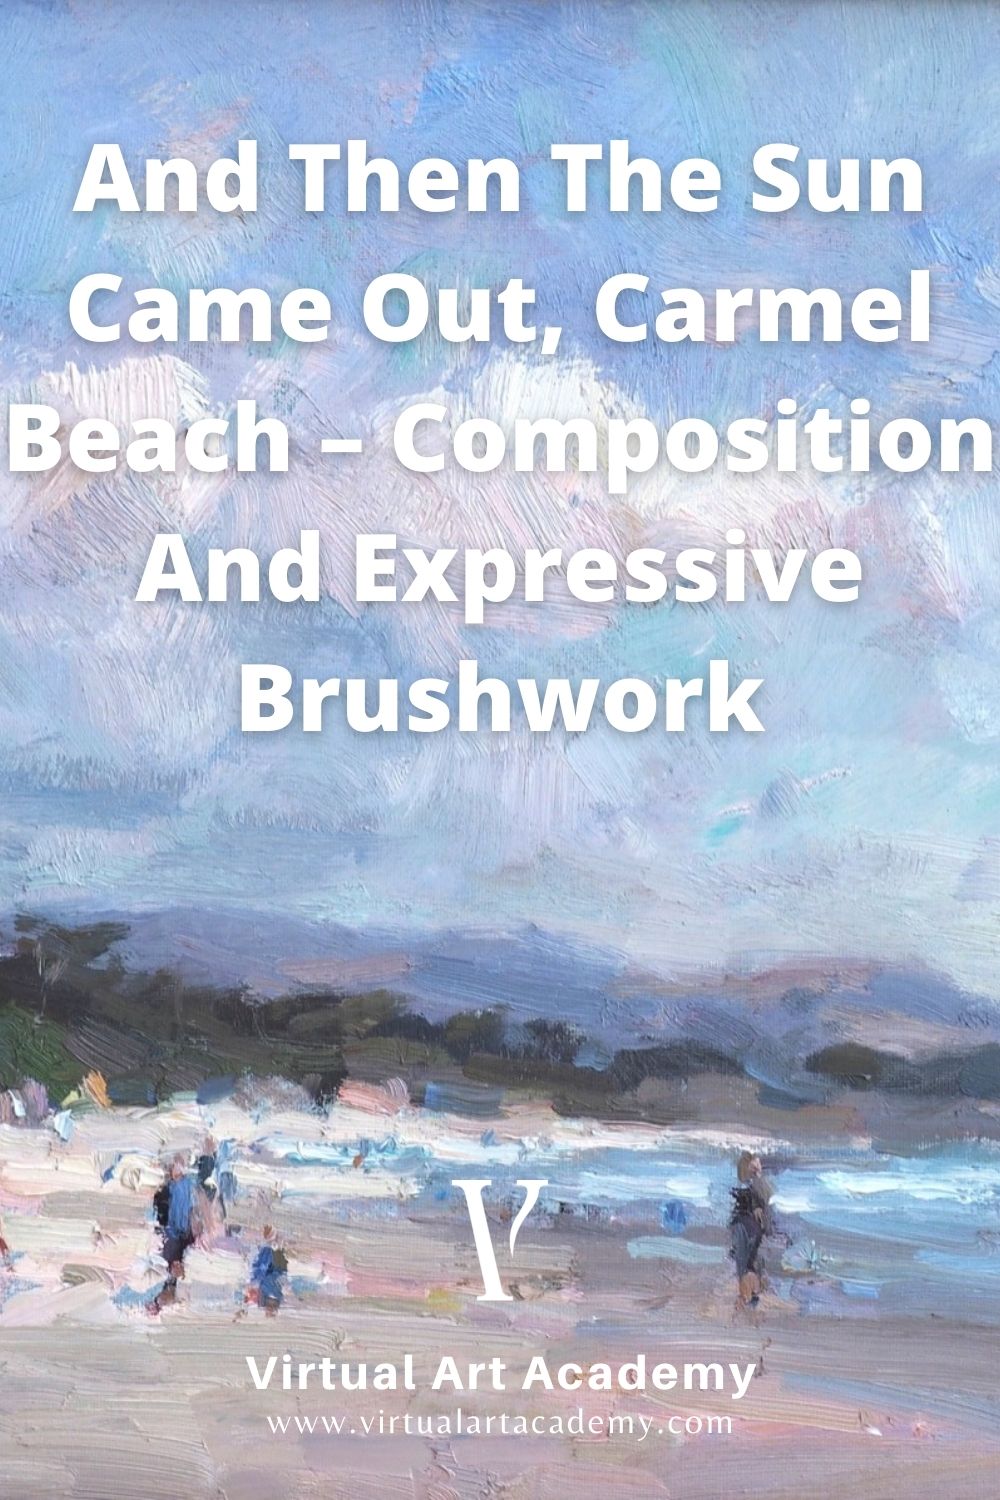 Cat. No. 1023 And Then The Sun Came Out, Carmel Beach - Composition And Expressive Brushwork